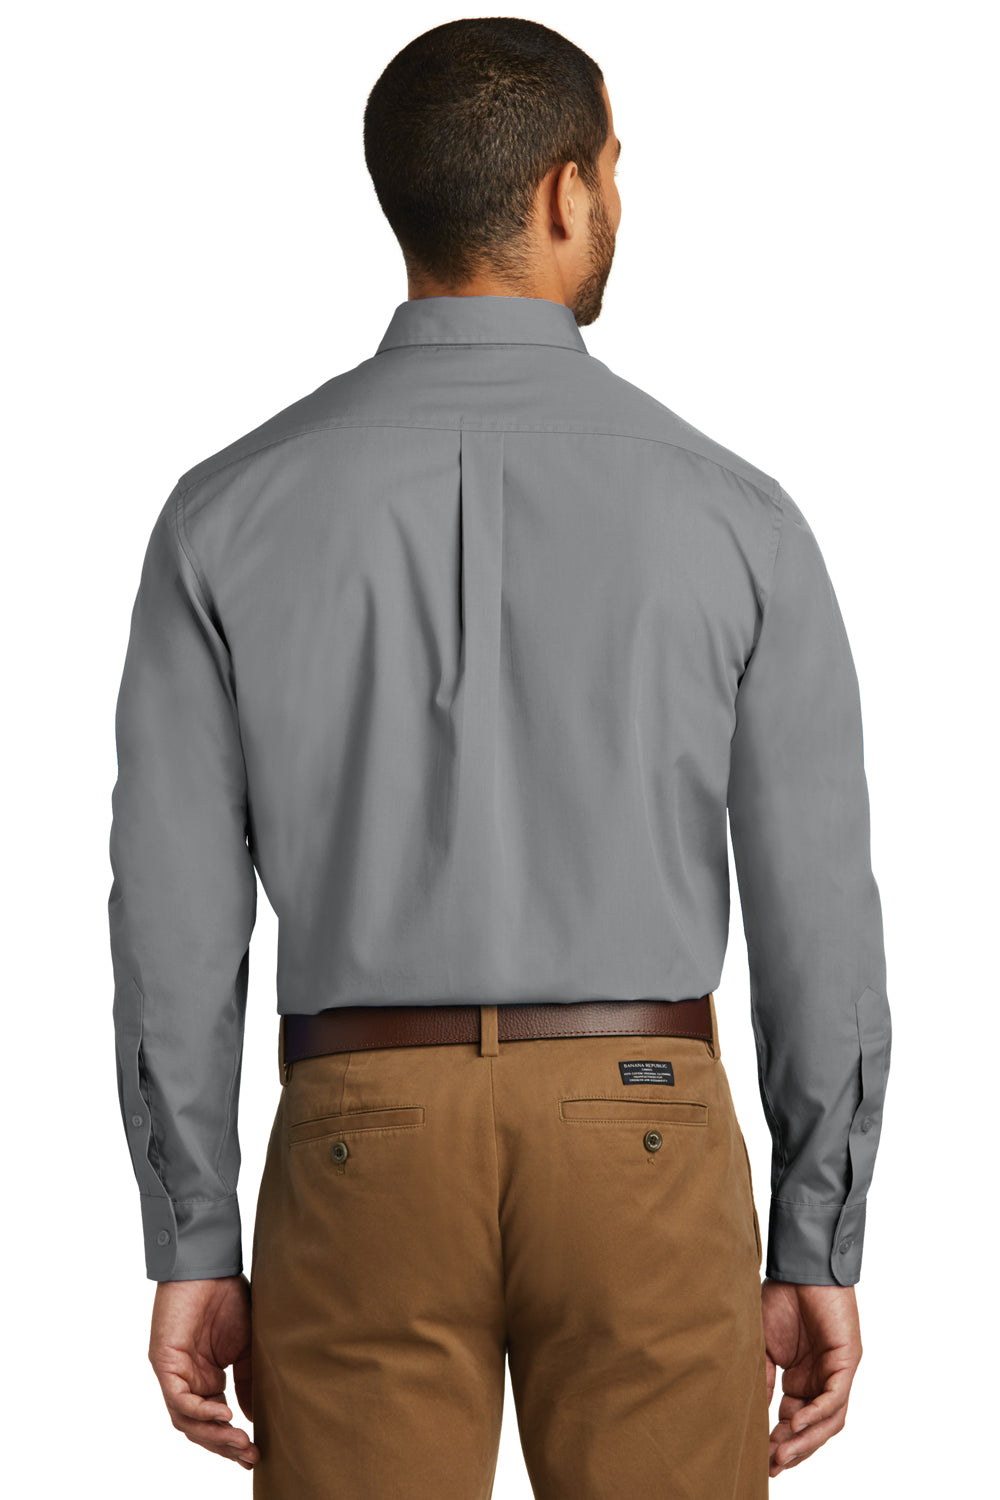 Port Authority W100 Mens Carefree Stain Resistant Long Sleeve Button Down Shirt w/ Pocket Gusty Grey Back